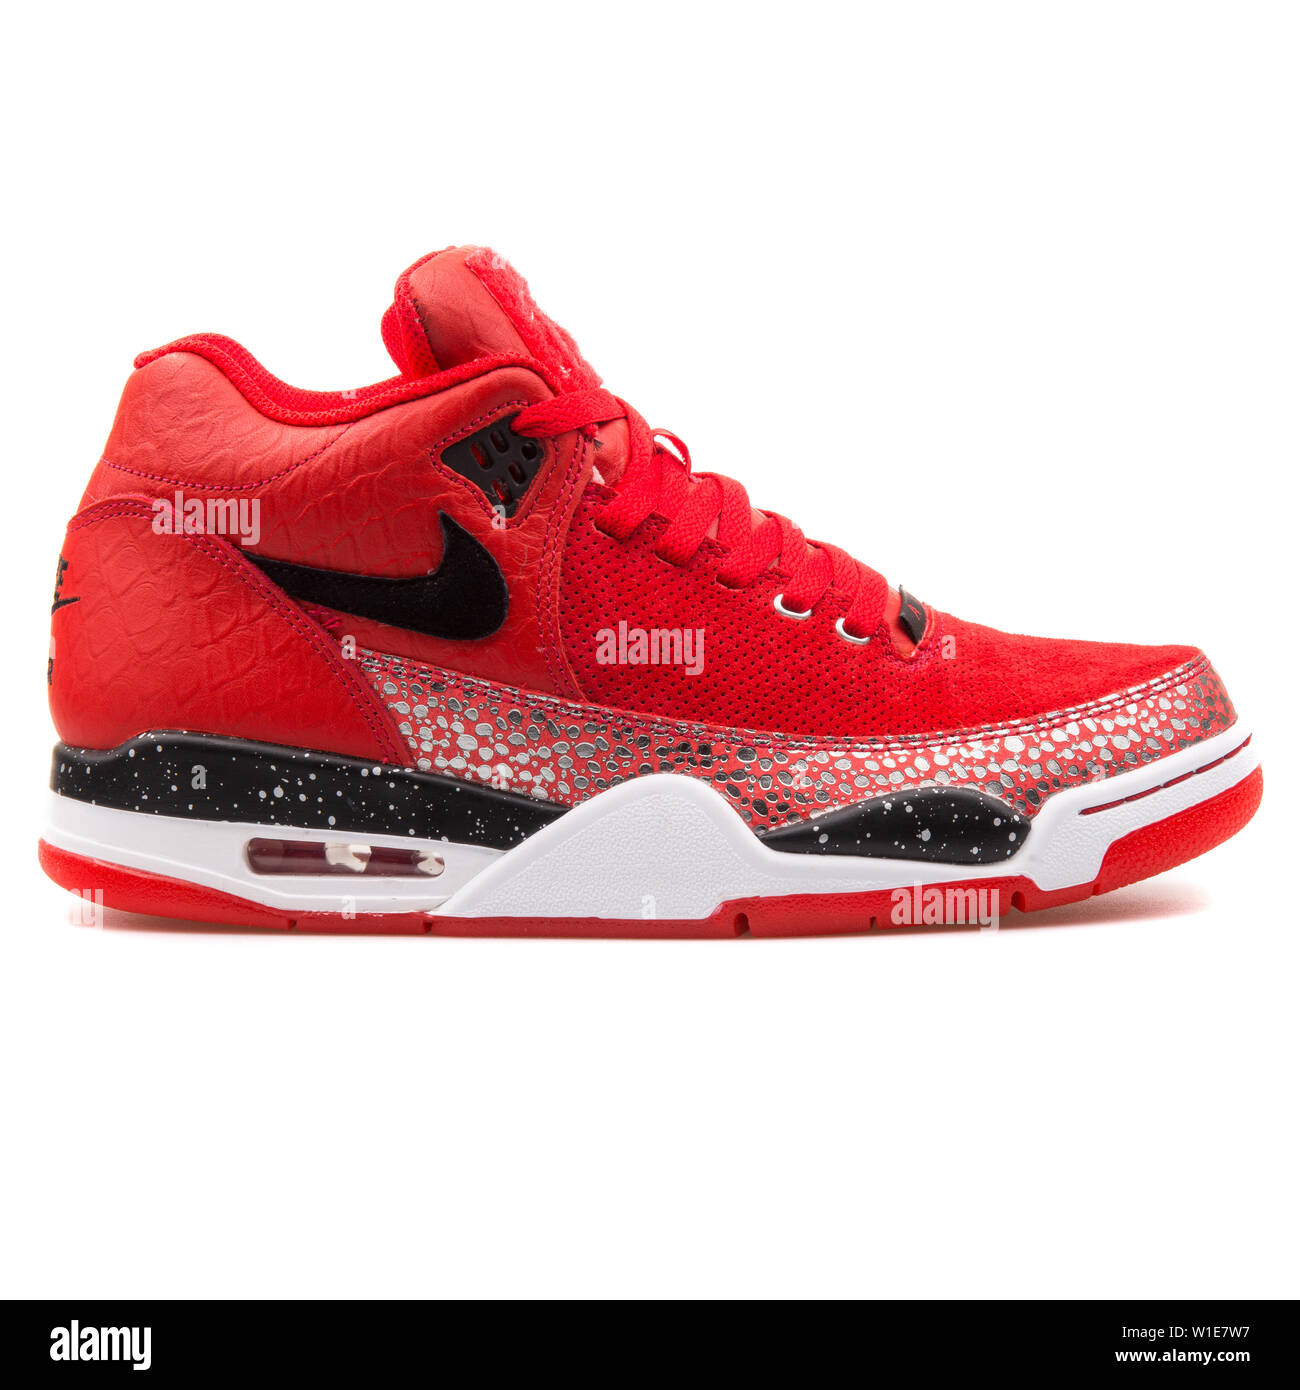 VIENNA, AUSTRIA - AUGUST 25, 2017: Nike Flight Squad QS red and black  sneaker on white background Stock Photo - Alamy